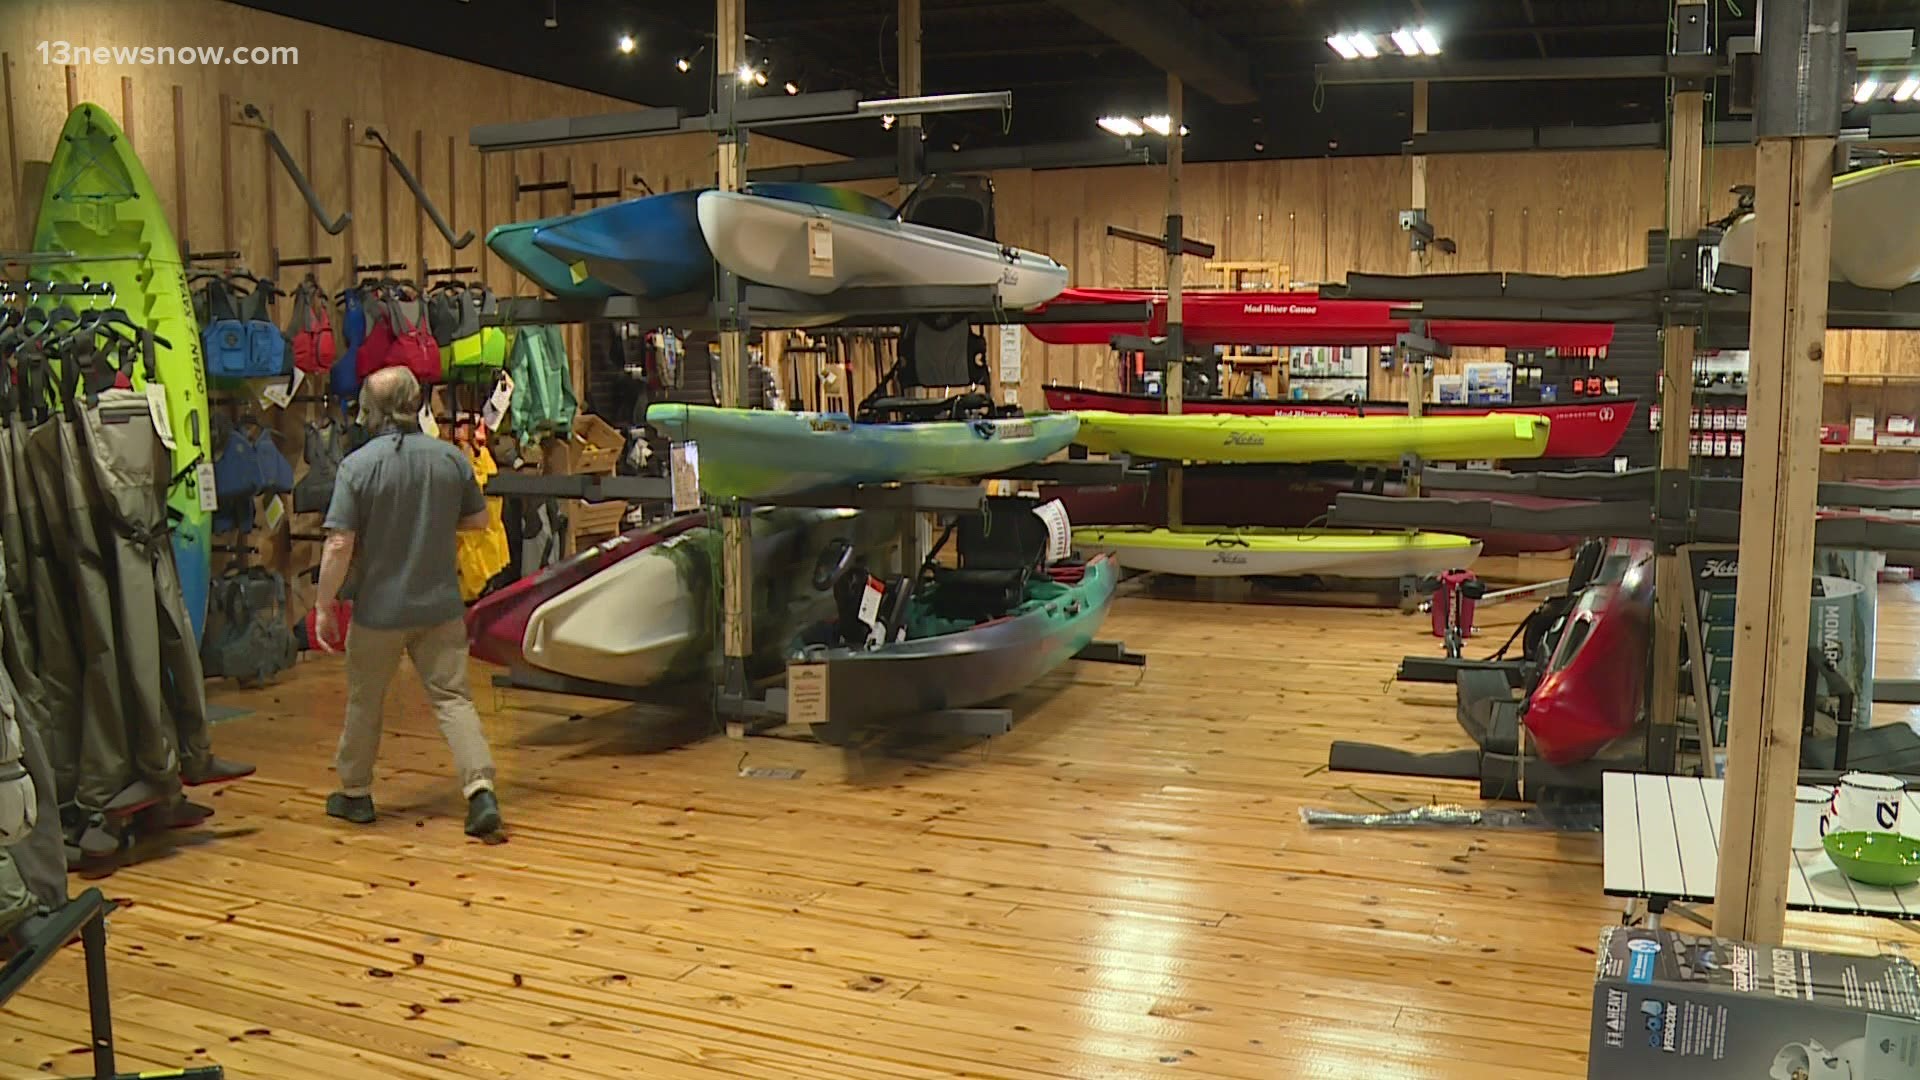 The pandemic isn't the only reason kayaks are hard to find right now.